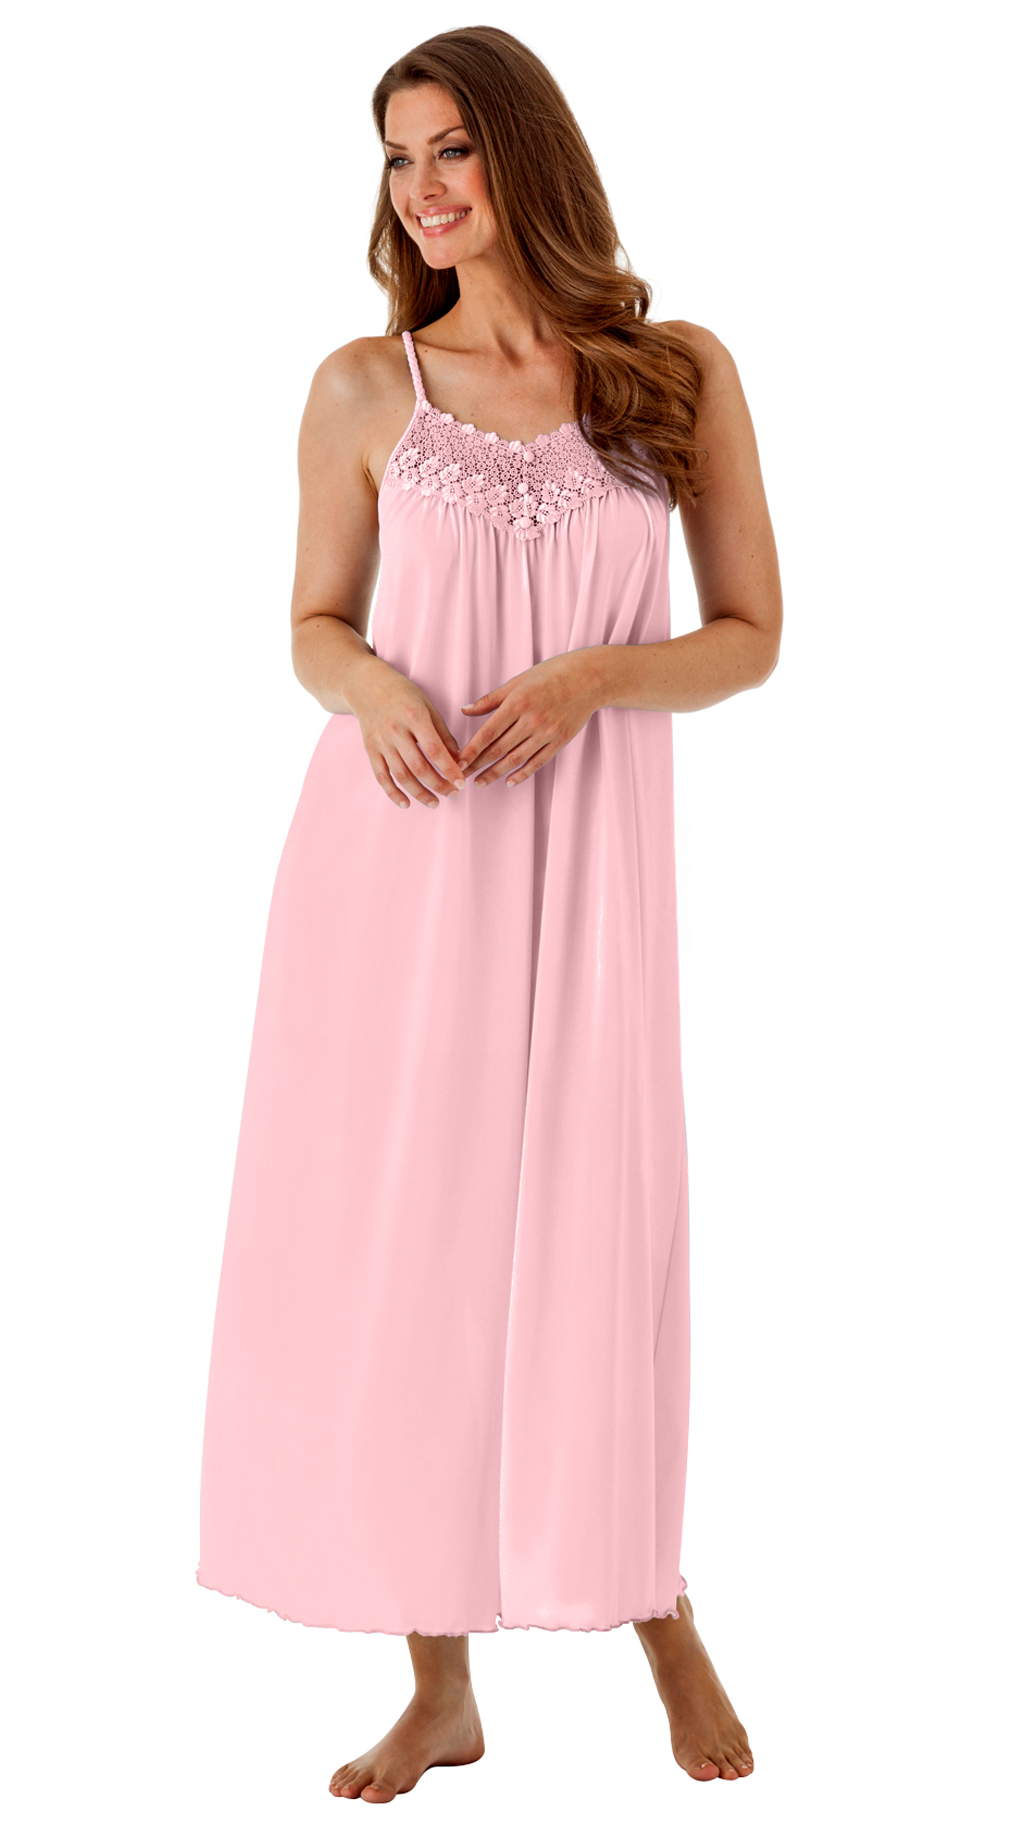 Silk And Lace Nightgowns For Women Plus Size Nighty For Ladies 